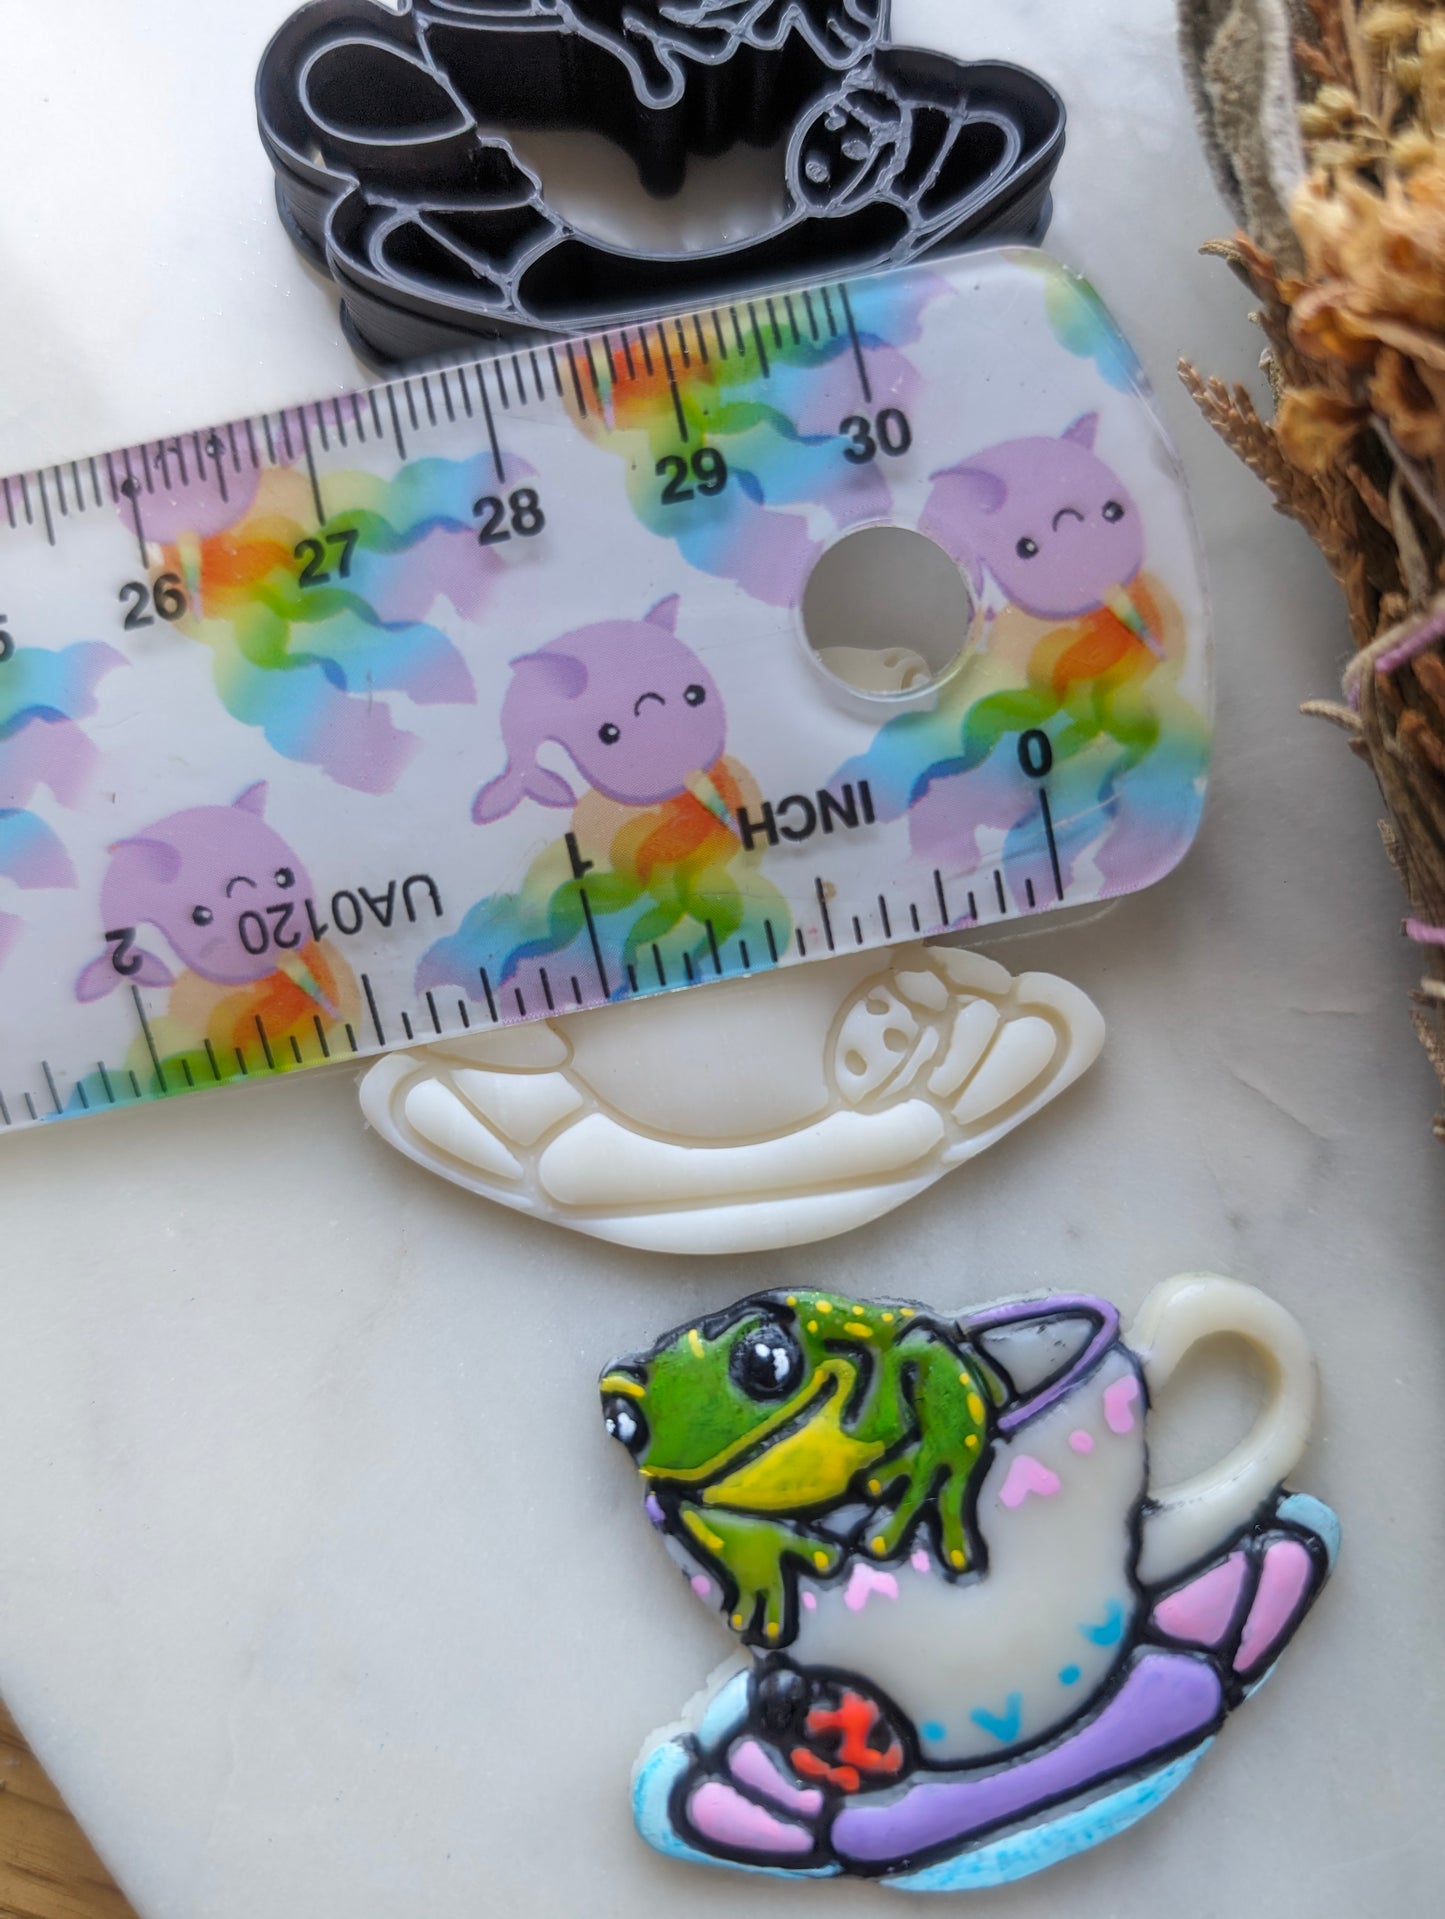 Frog in a Teacup with Saucer Sharp Clay Cutter